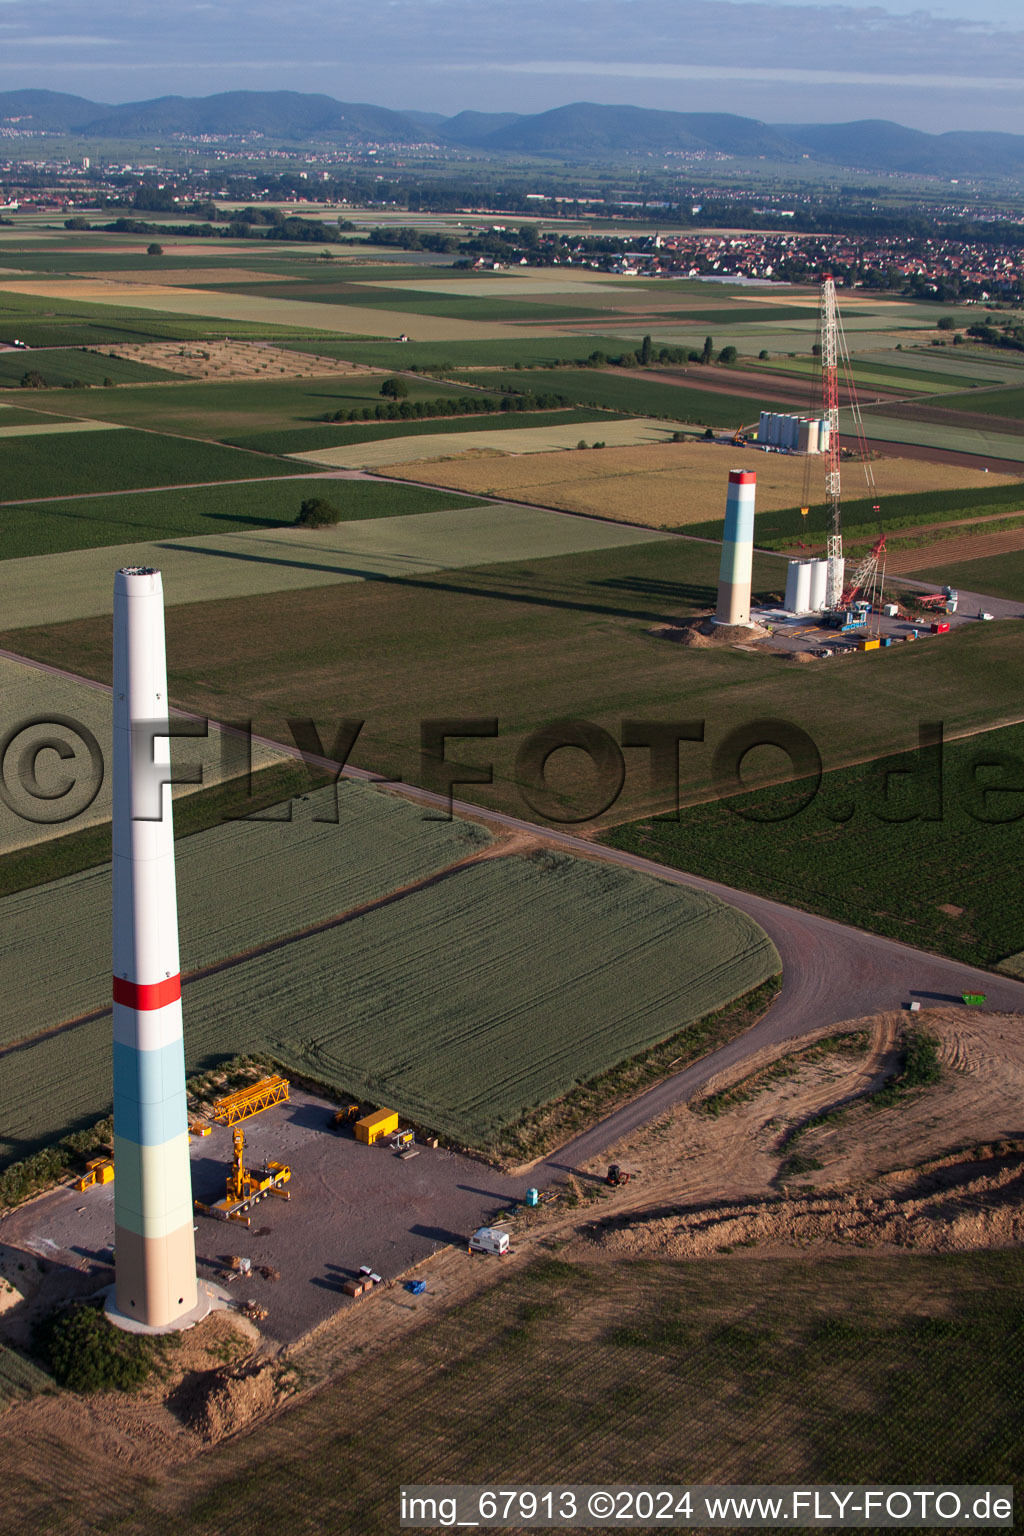 New wind farm in Offenbach an der Queich in the state Rhineland-Palatinate, Germany seen from above